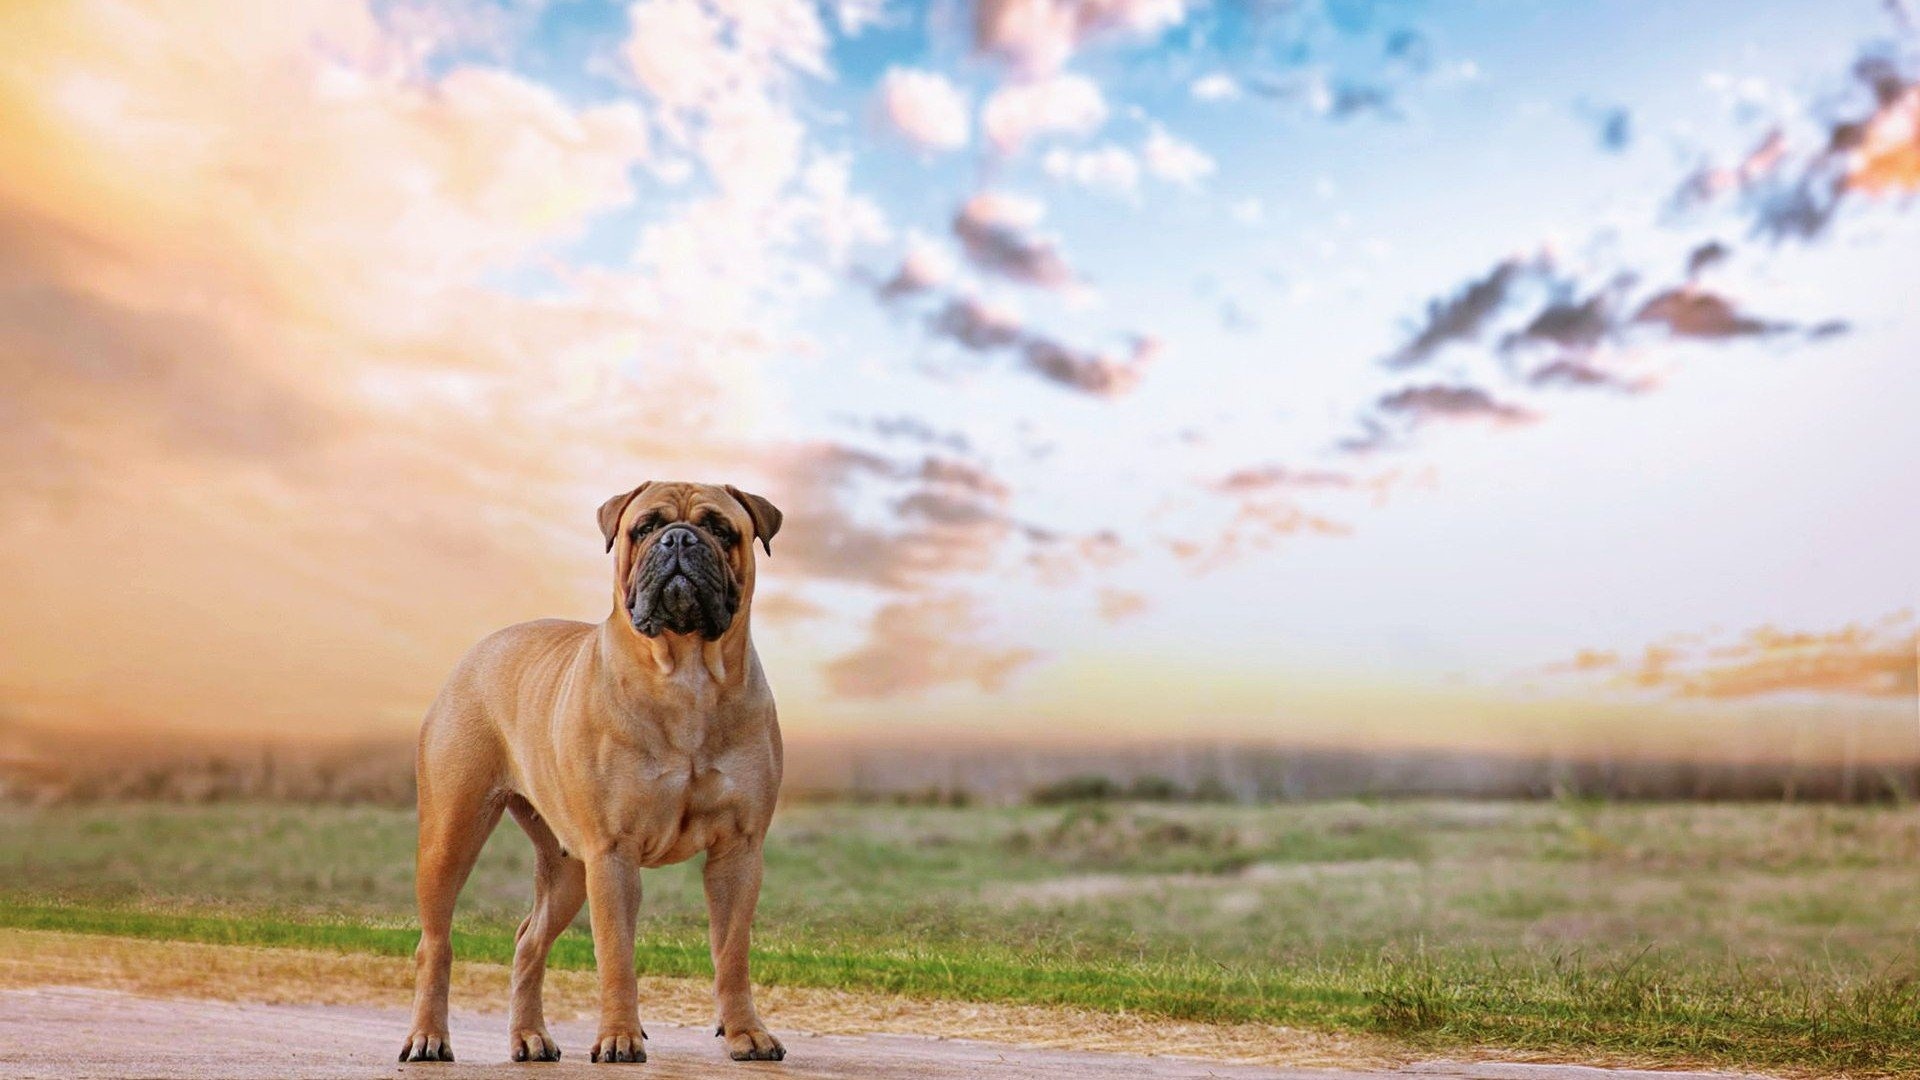 Bullmastiff dog, Protective nature, HD wallpapers, Mobile backgrounds, 1920x1080 Full HD Desktop